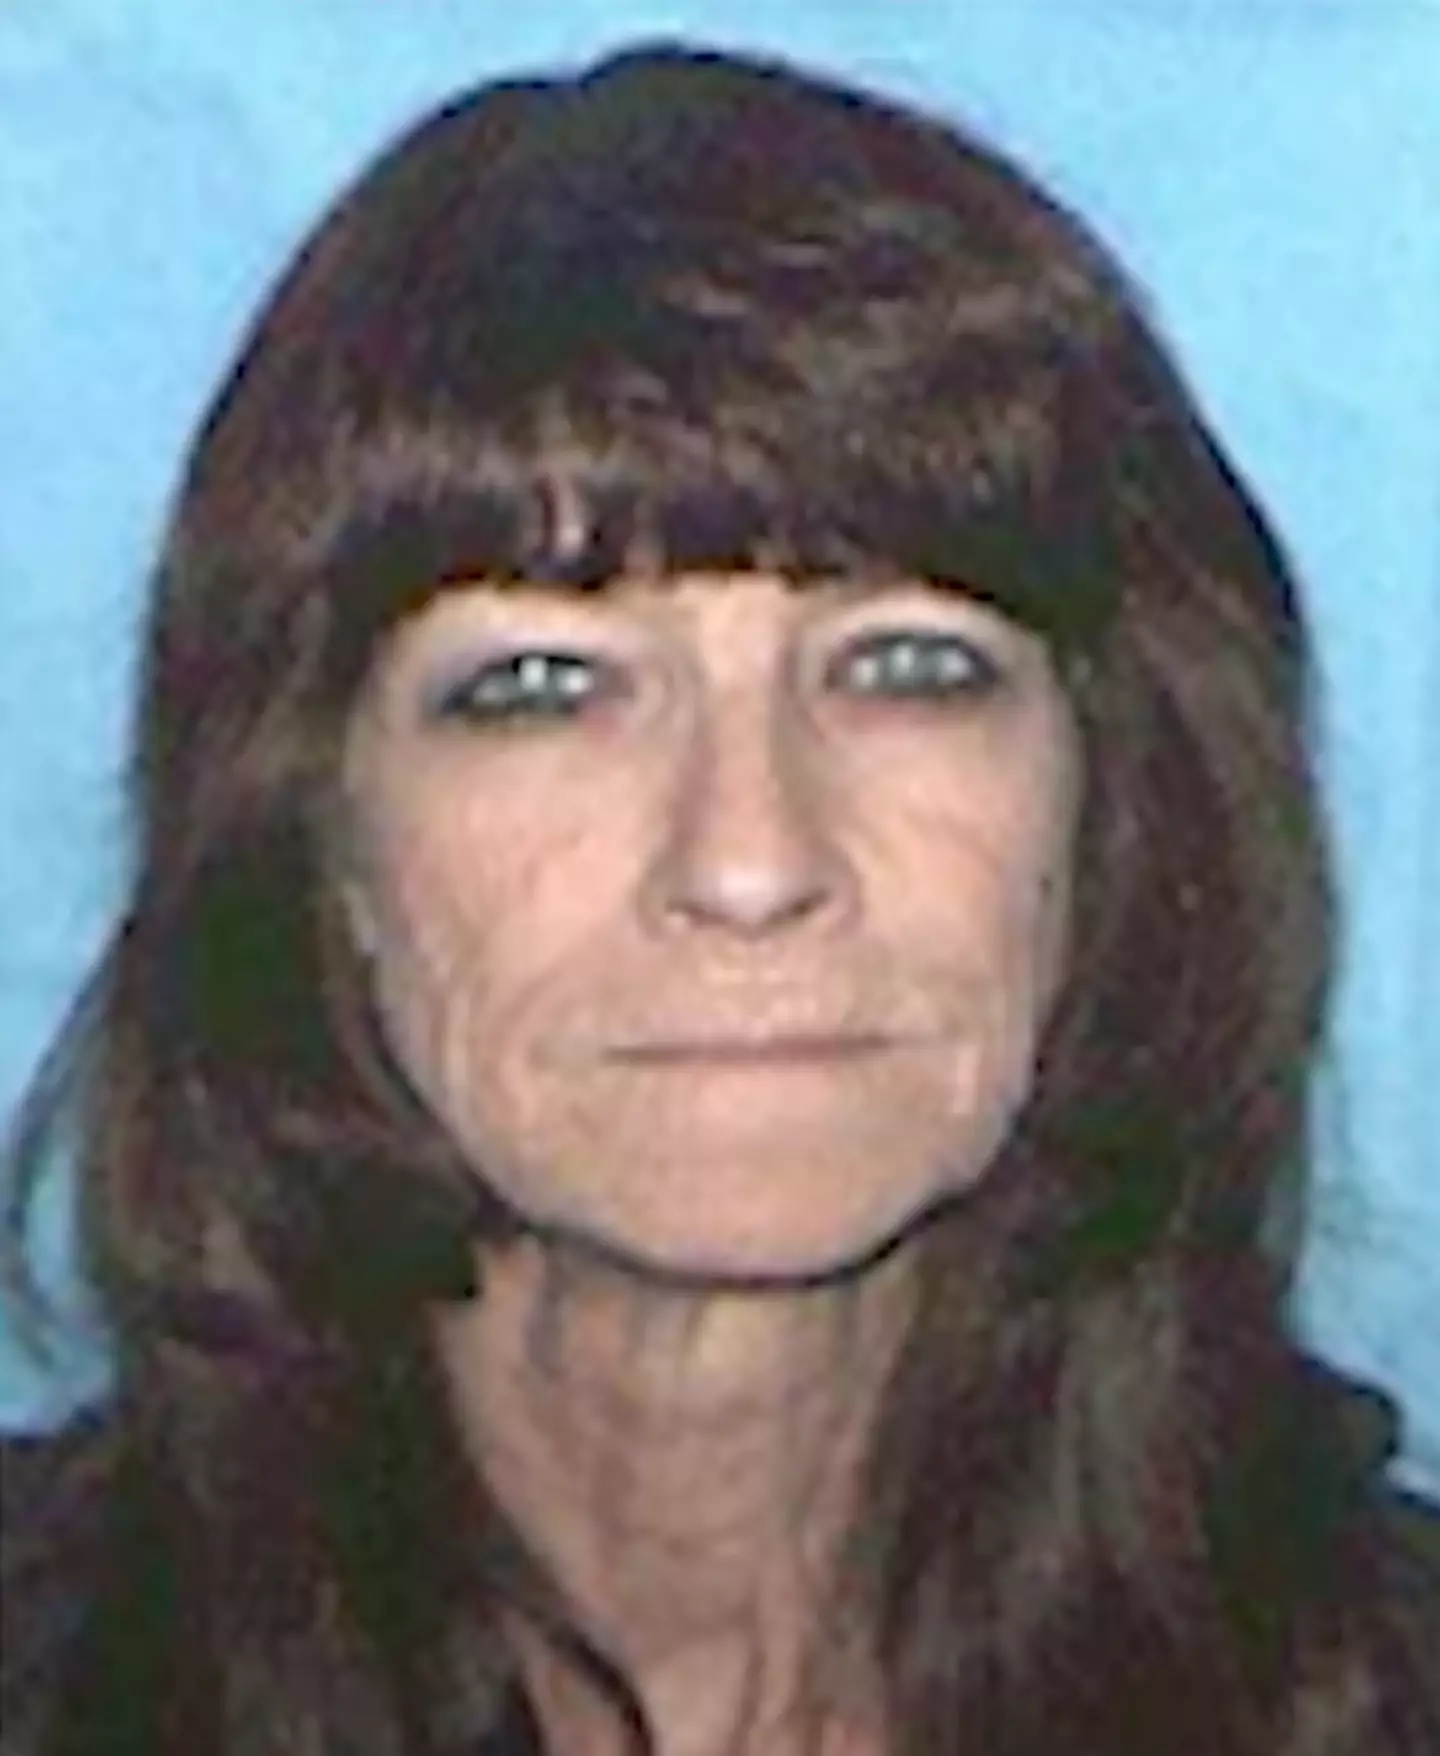 On 27 February 2012, Linda Riley was reported missing from her home. (Springfield Police Department)